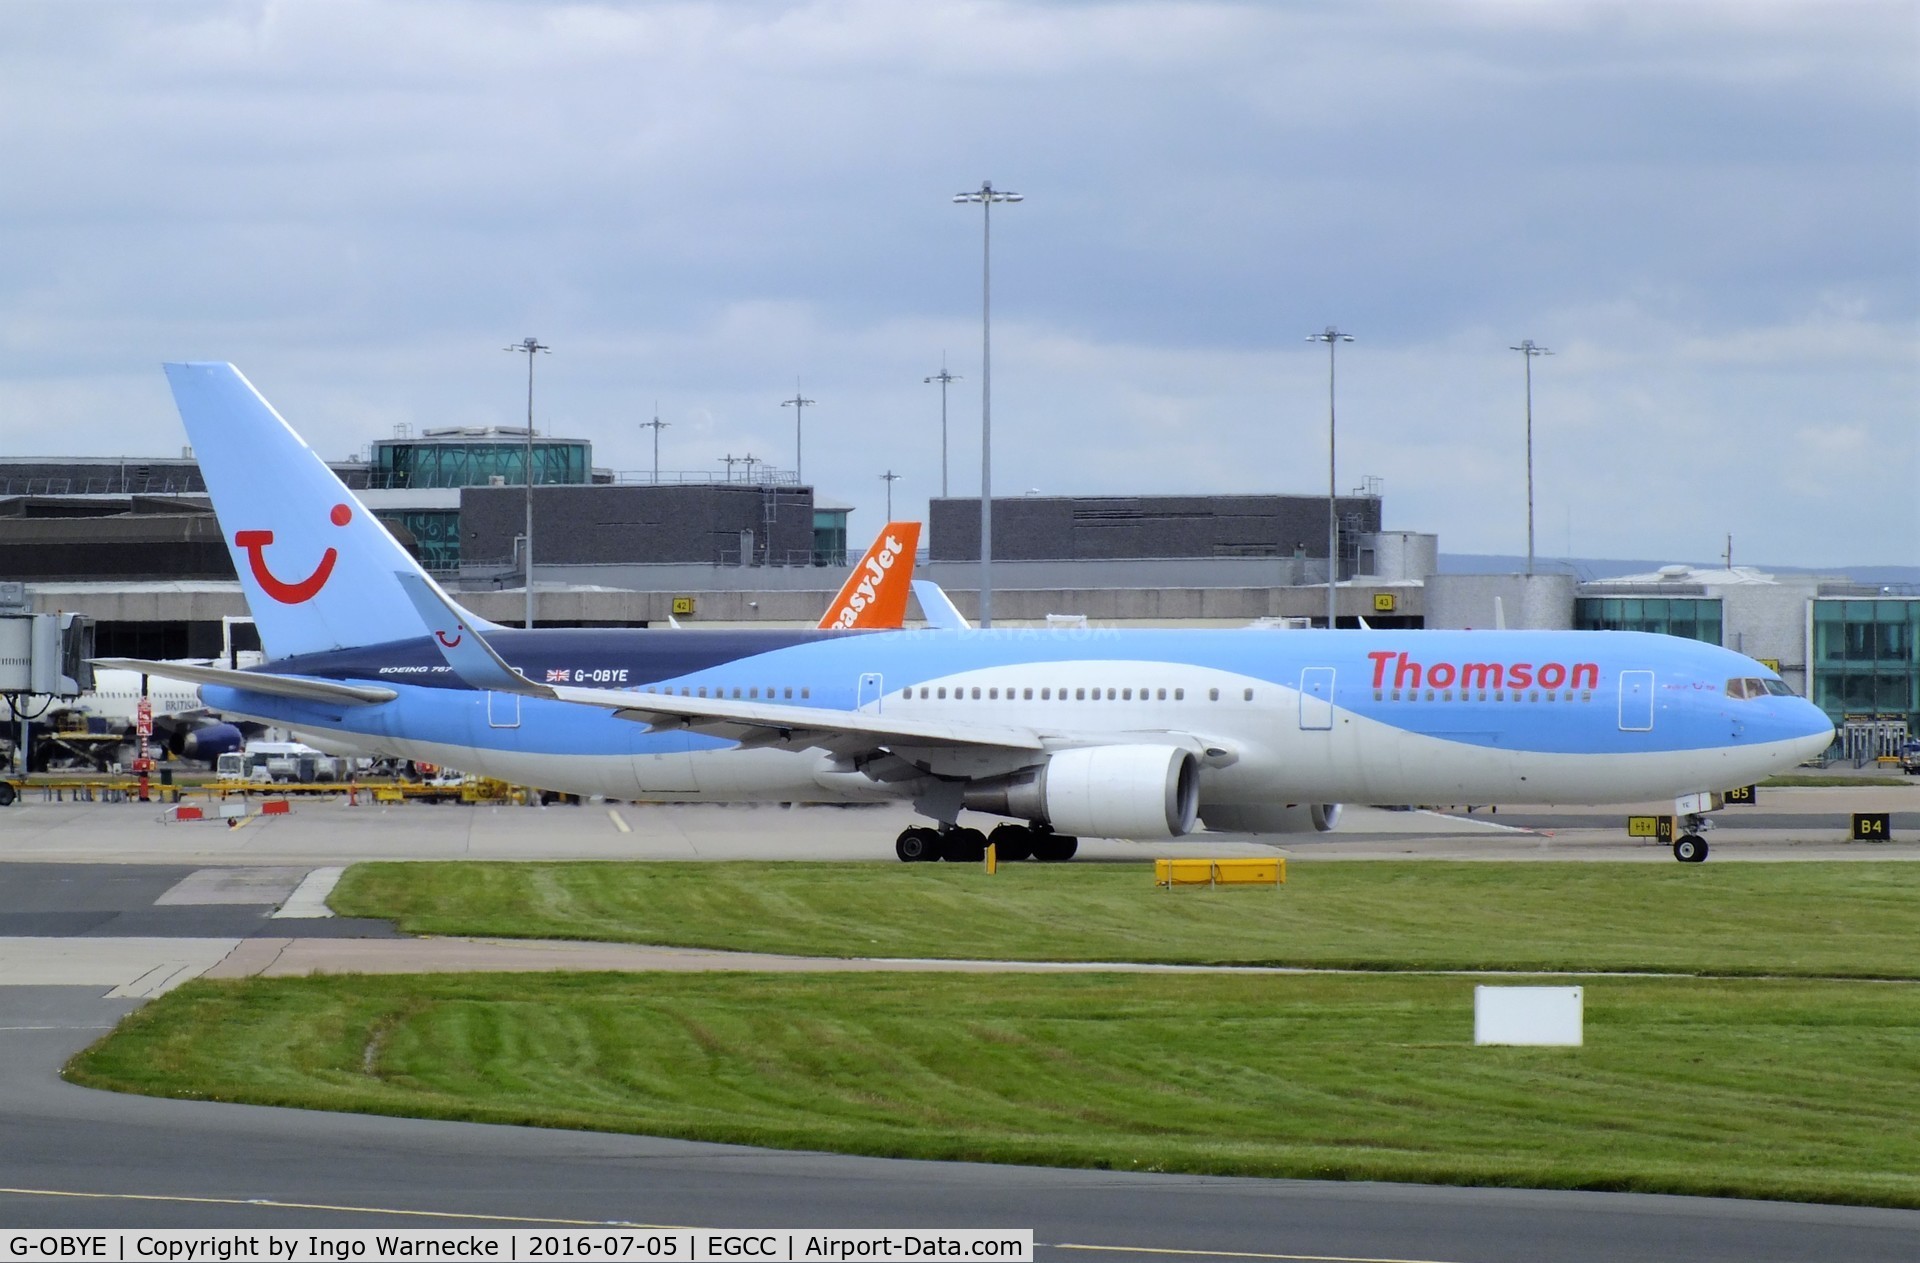 G-OBYE, 1998 Boeing 767-304/ER C/N 28979, Boeing 767-304/ER of TUI Airways (Thomson) at Manchester airport